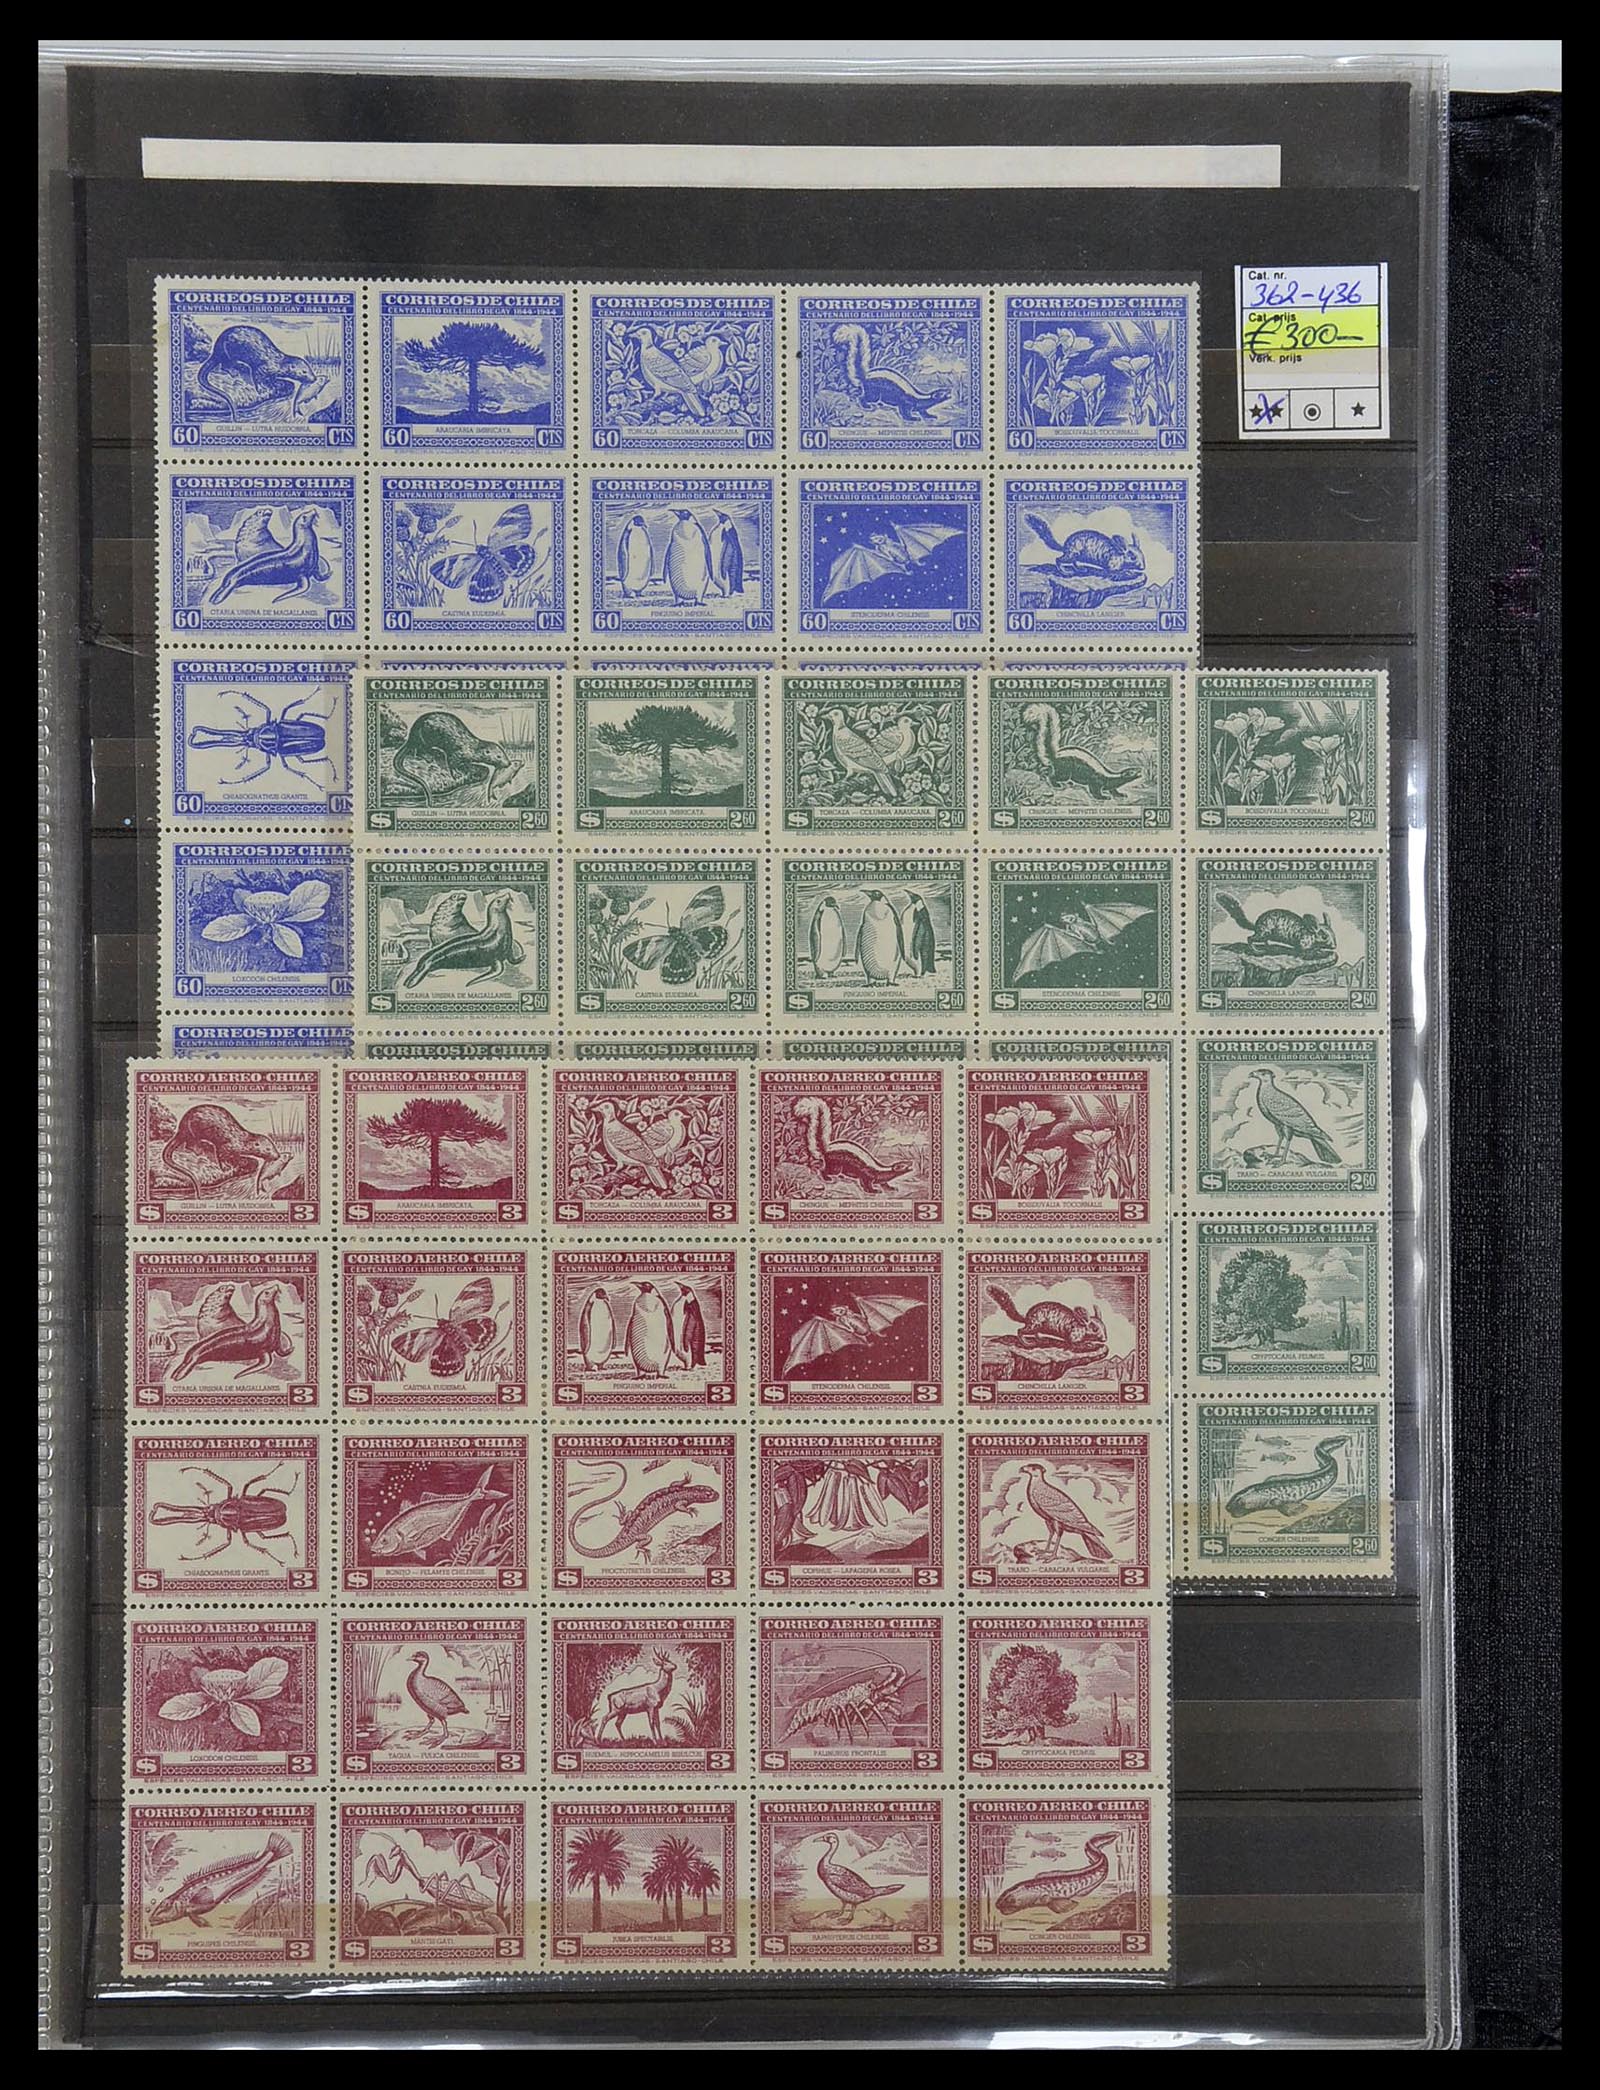 34290 045 - Stamp collection 34290 Theme animals MNH 1926-2005.